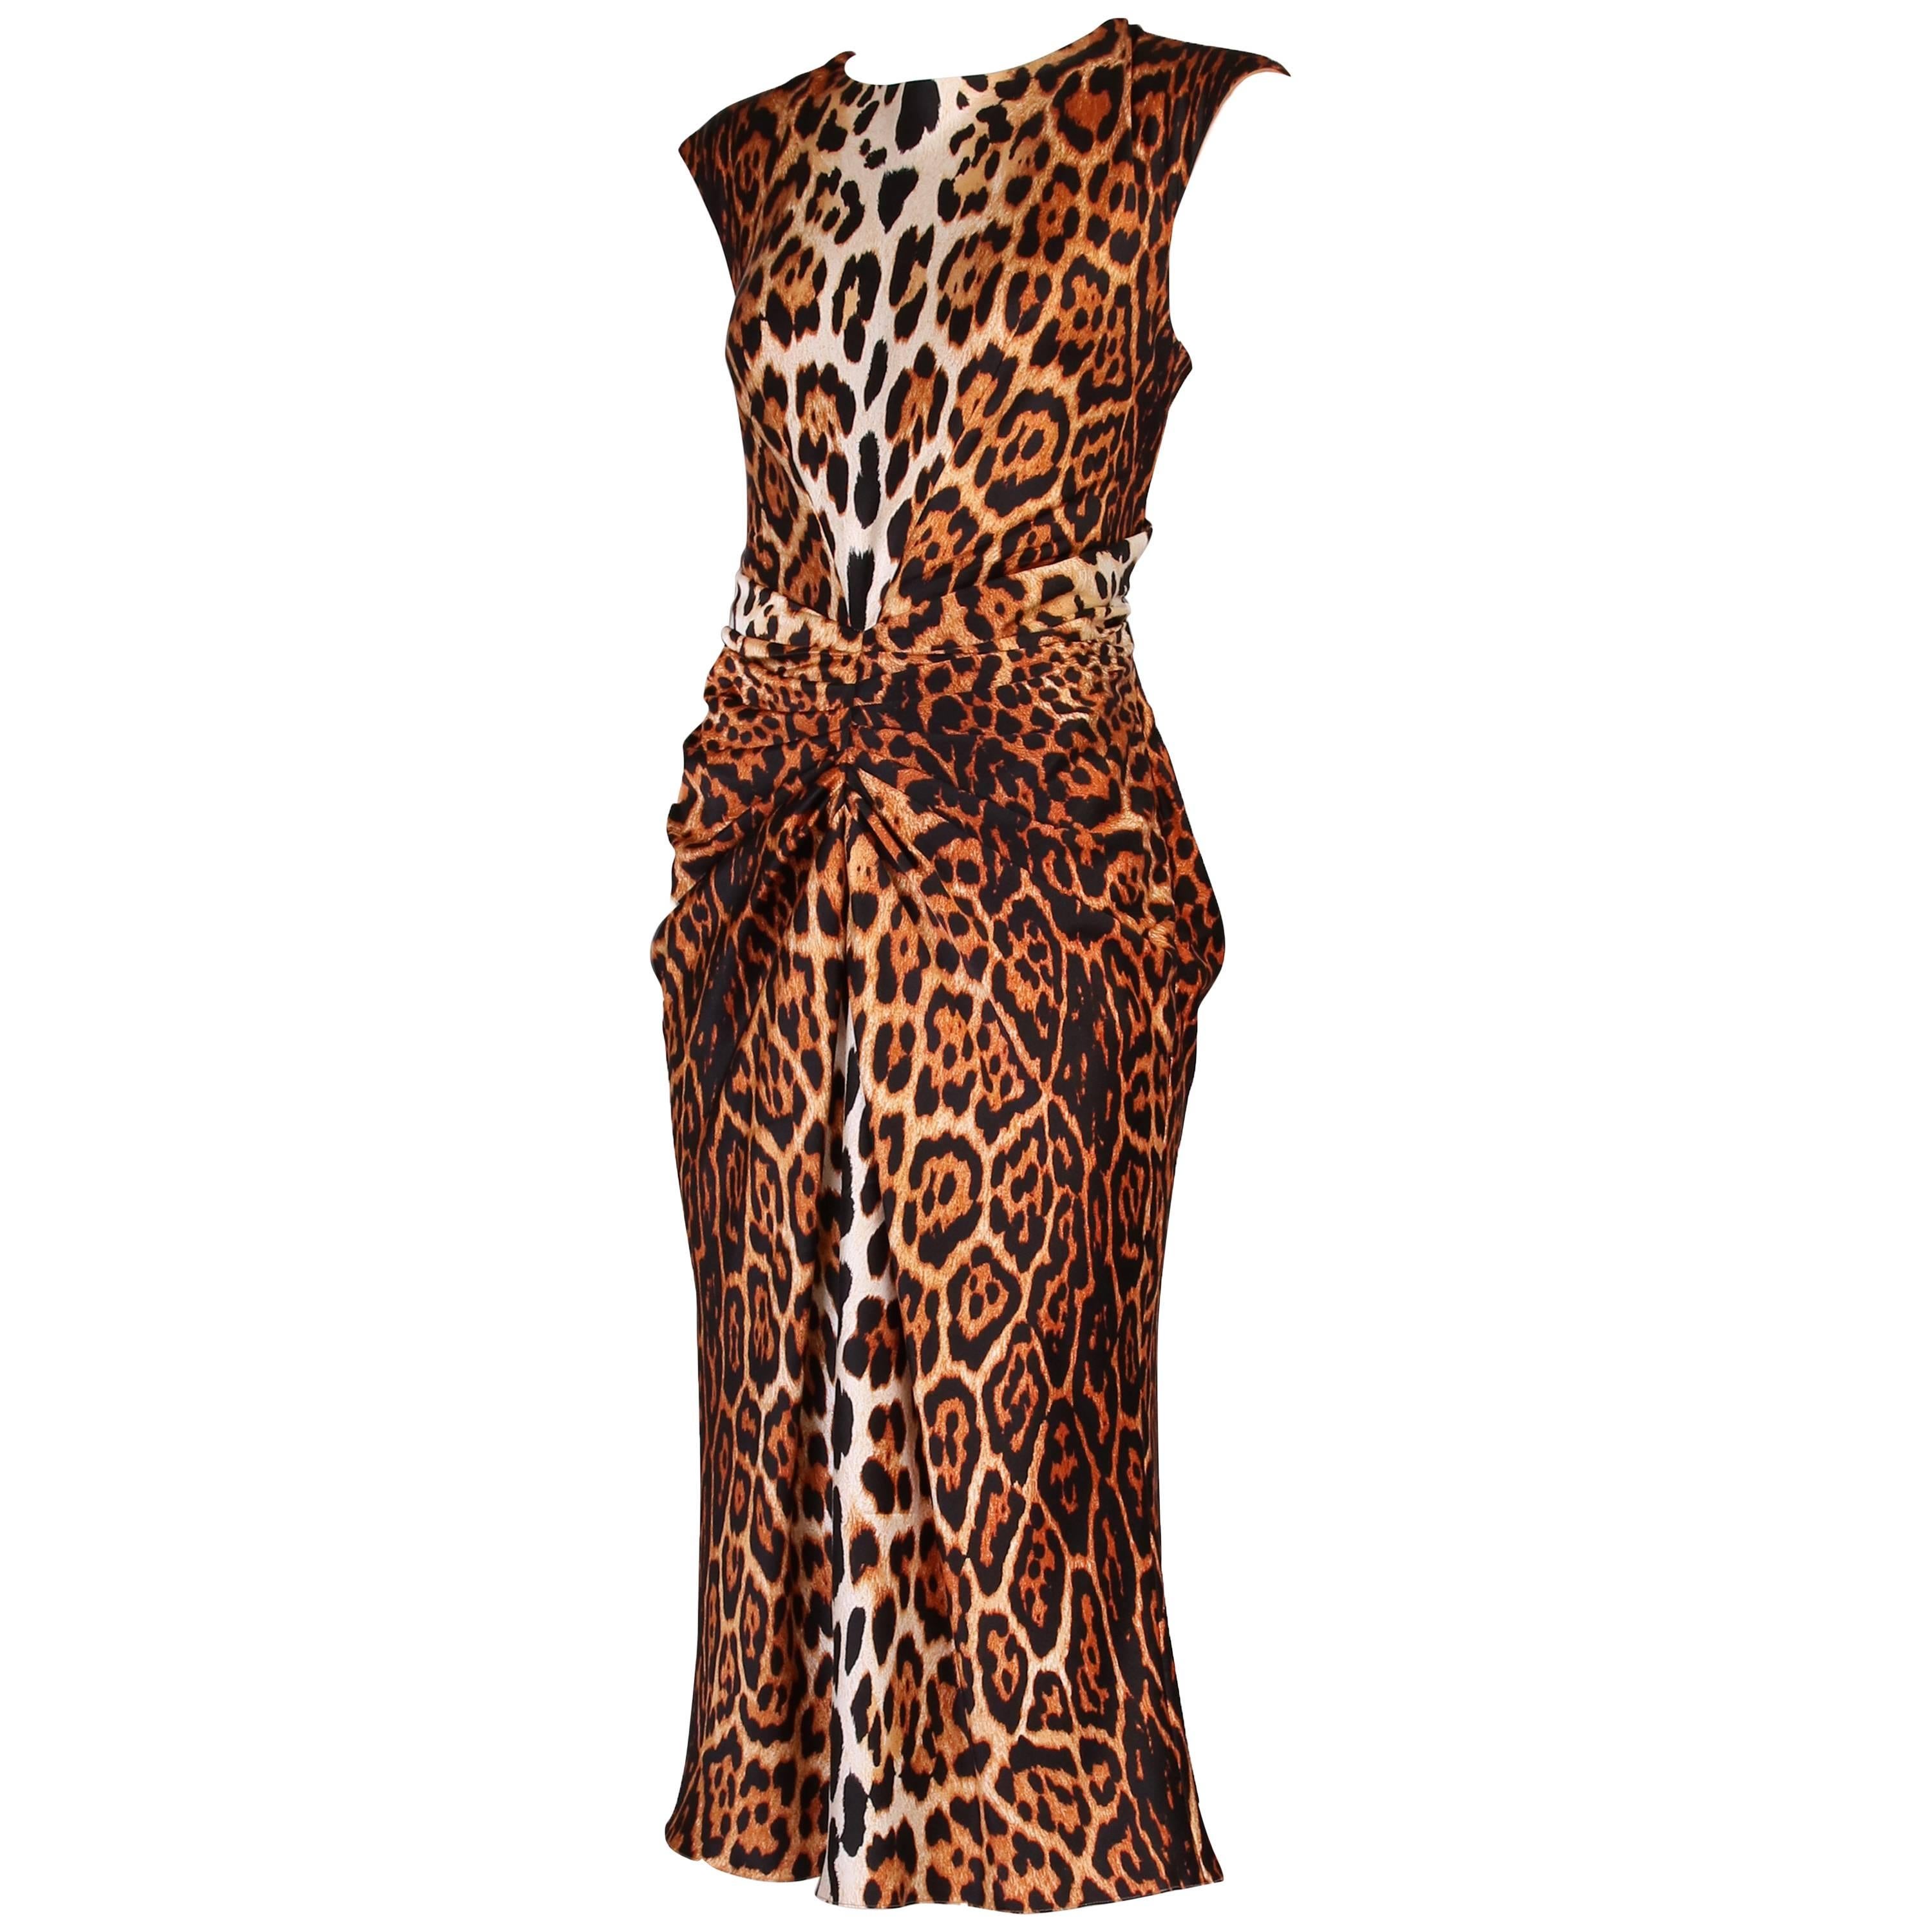 2008 A/H Christian Dior by John Galliano Silk Leopard Cocktail Dress For Sale